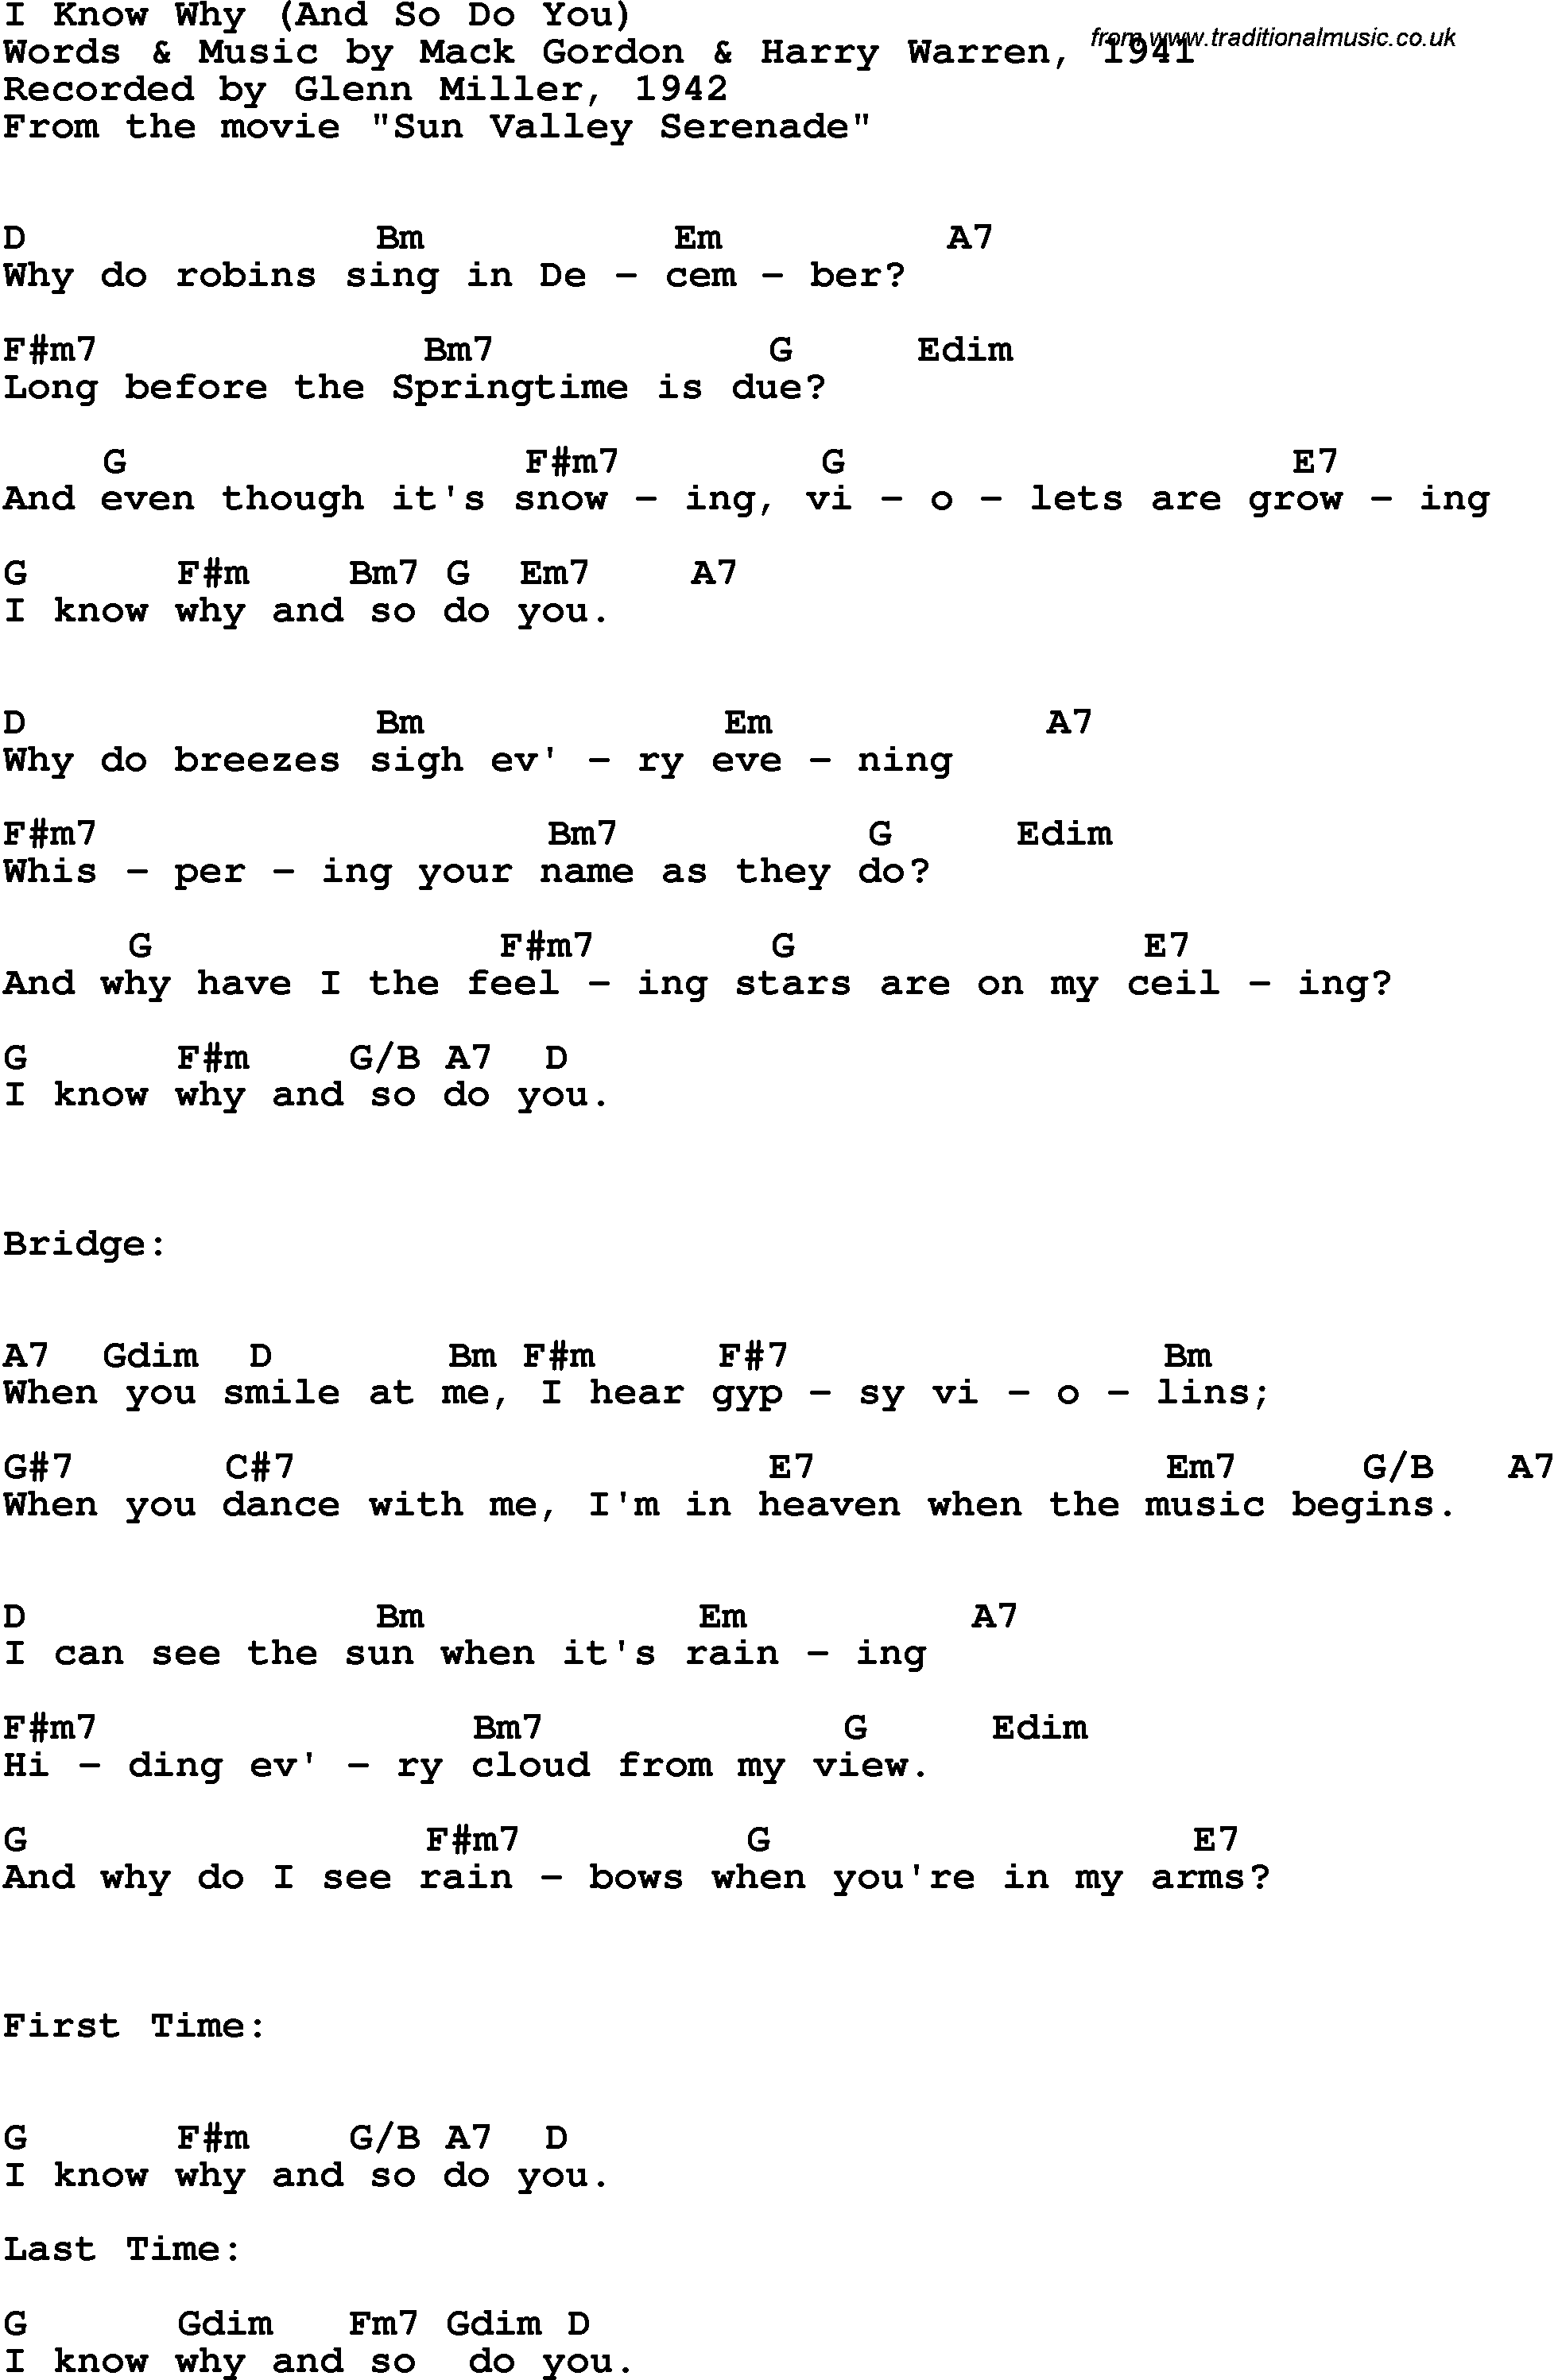 Song Lyrics with guitar chords for I Know Why (And So Do You) - Glenn Miller, 1942